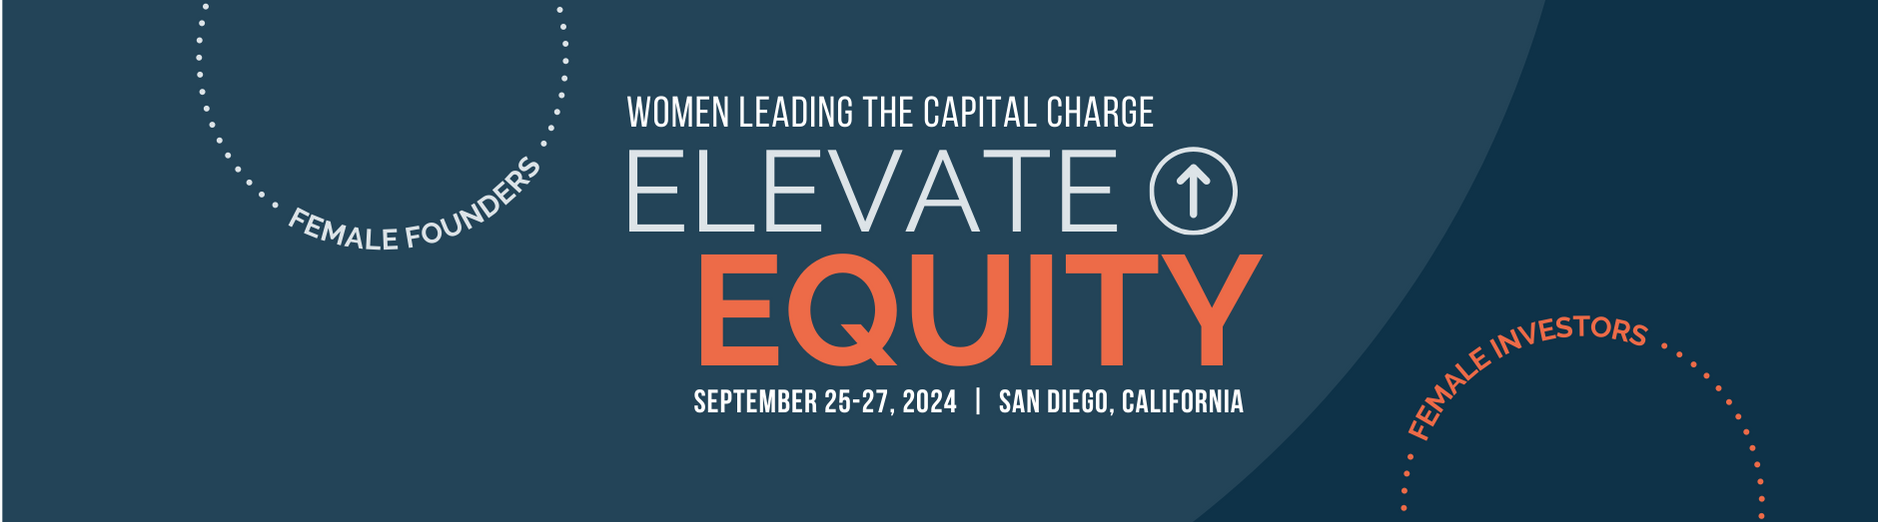 WVS Elevate Equity banner